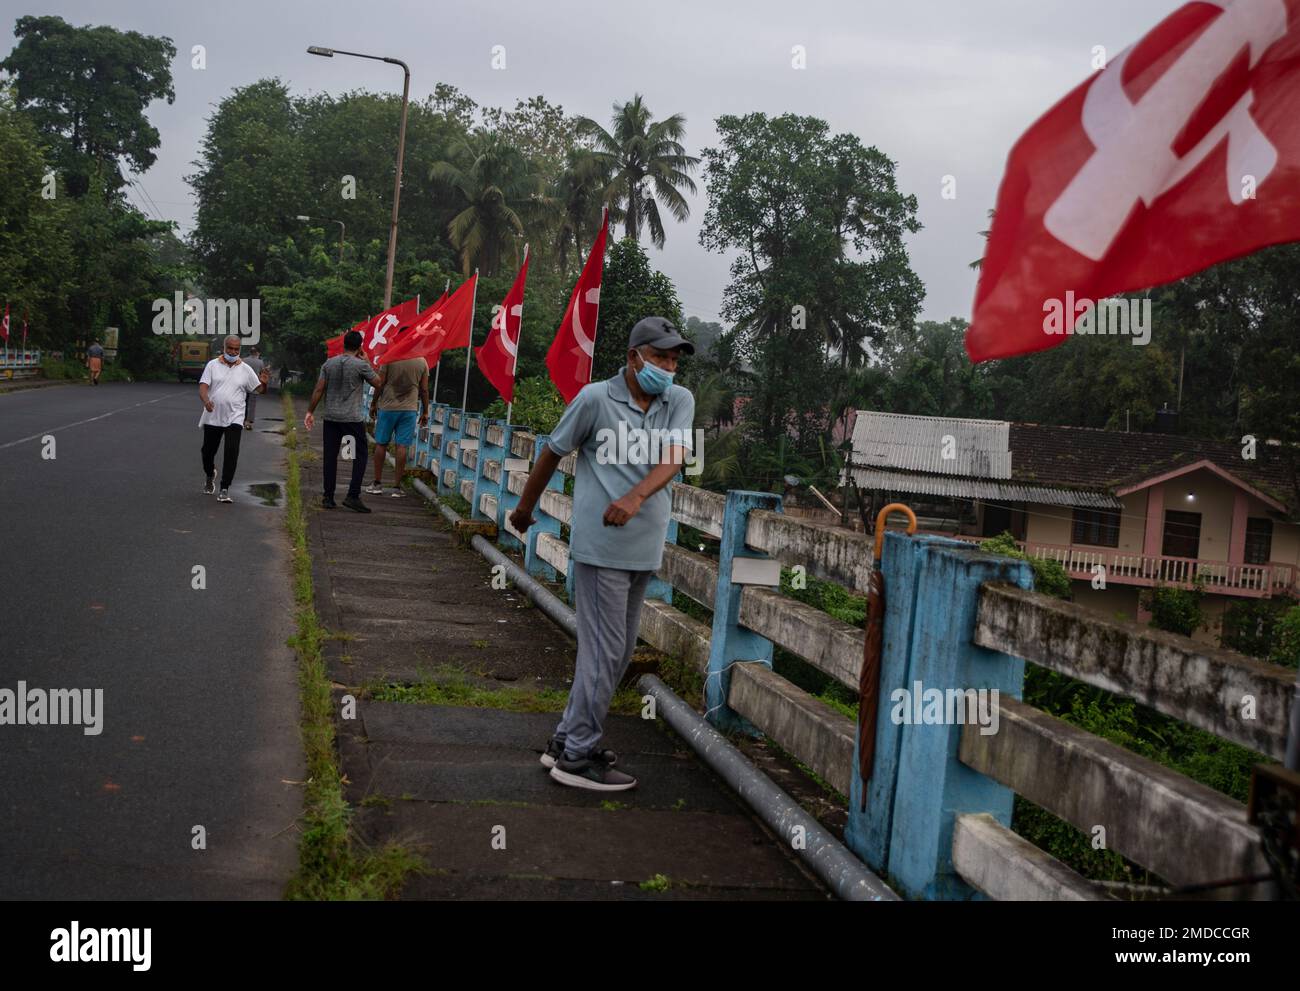 A man wearing mask as a precaution against the coronavirus performs morning exercises on a bridge where Communist party flags are displayed in Kochi, Kerala state, India, Wednesday, Oct.6, 2021. (AP Photo/R S Iyer) Banque D'Images